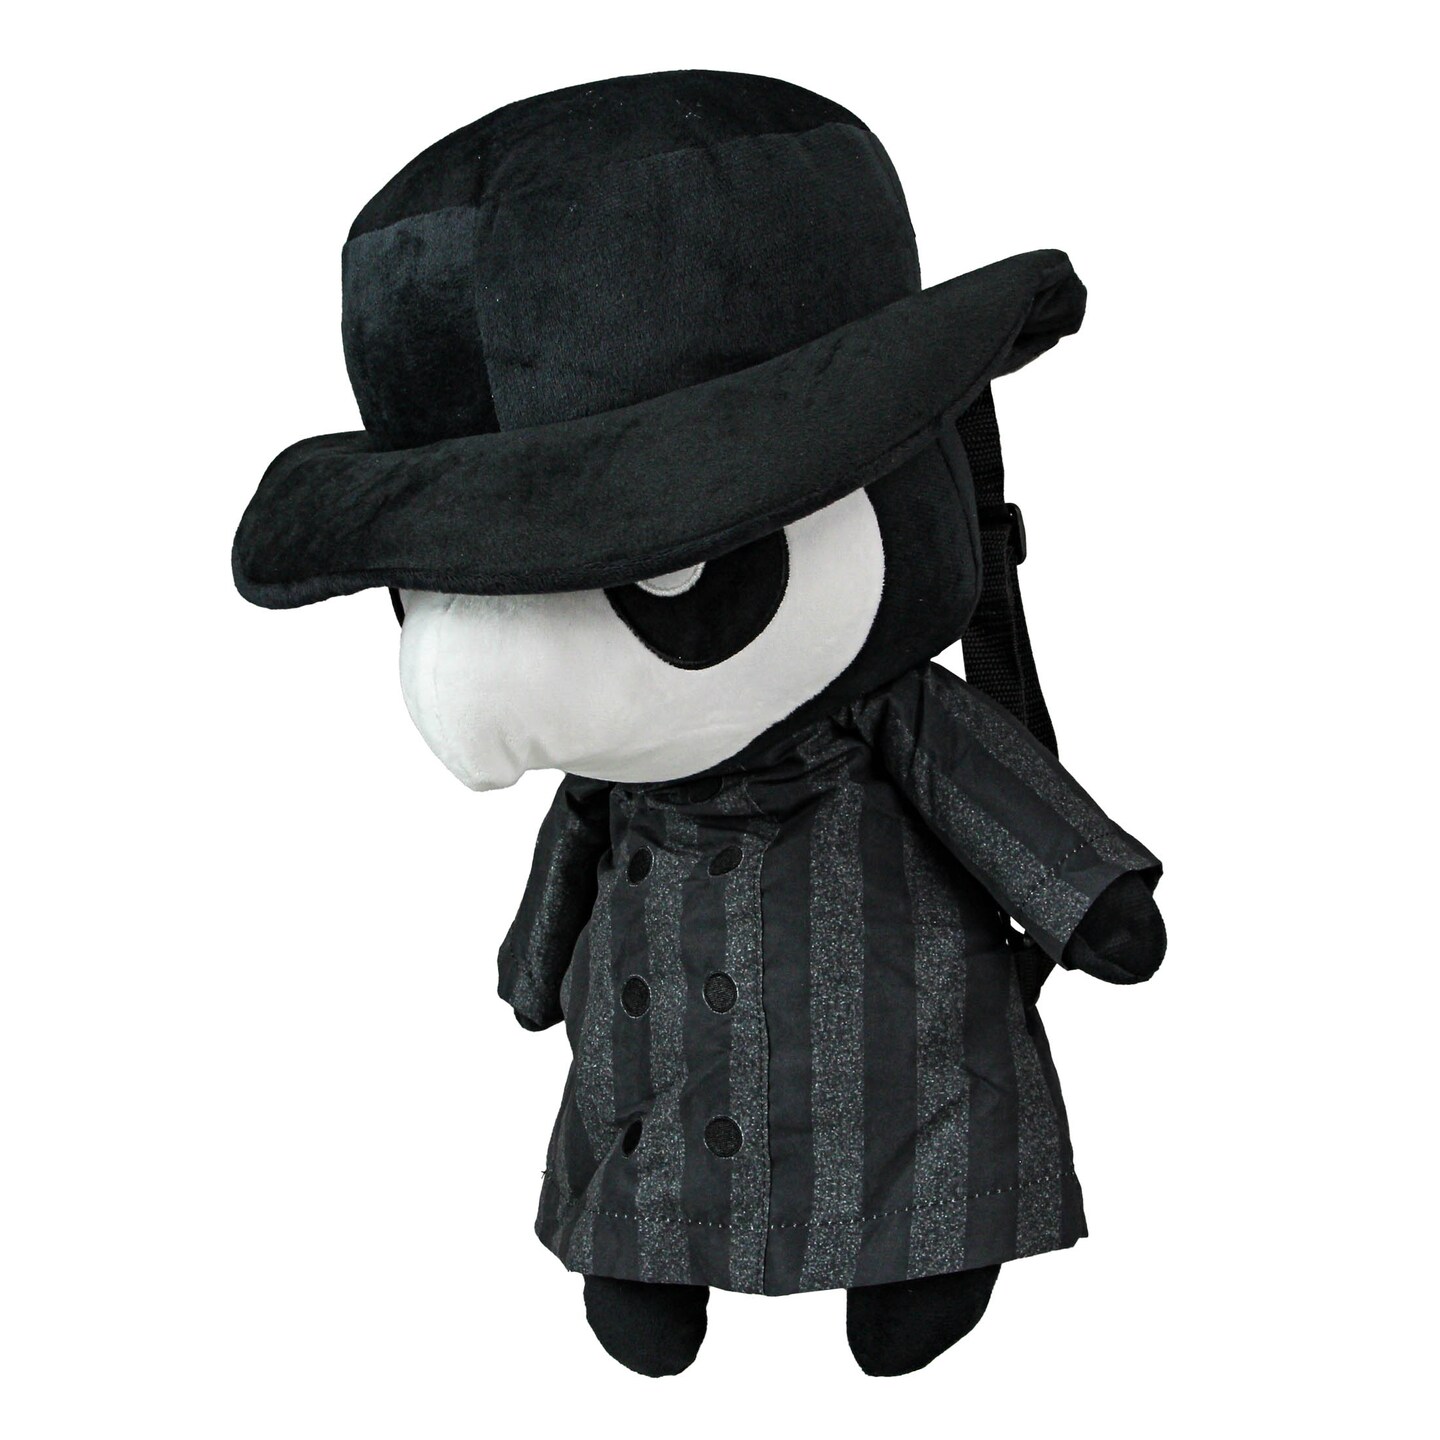 Creepy Cute Plague Doctor Plushie Backpack Black Polyester Halloween Fashion